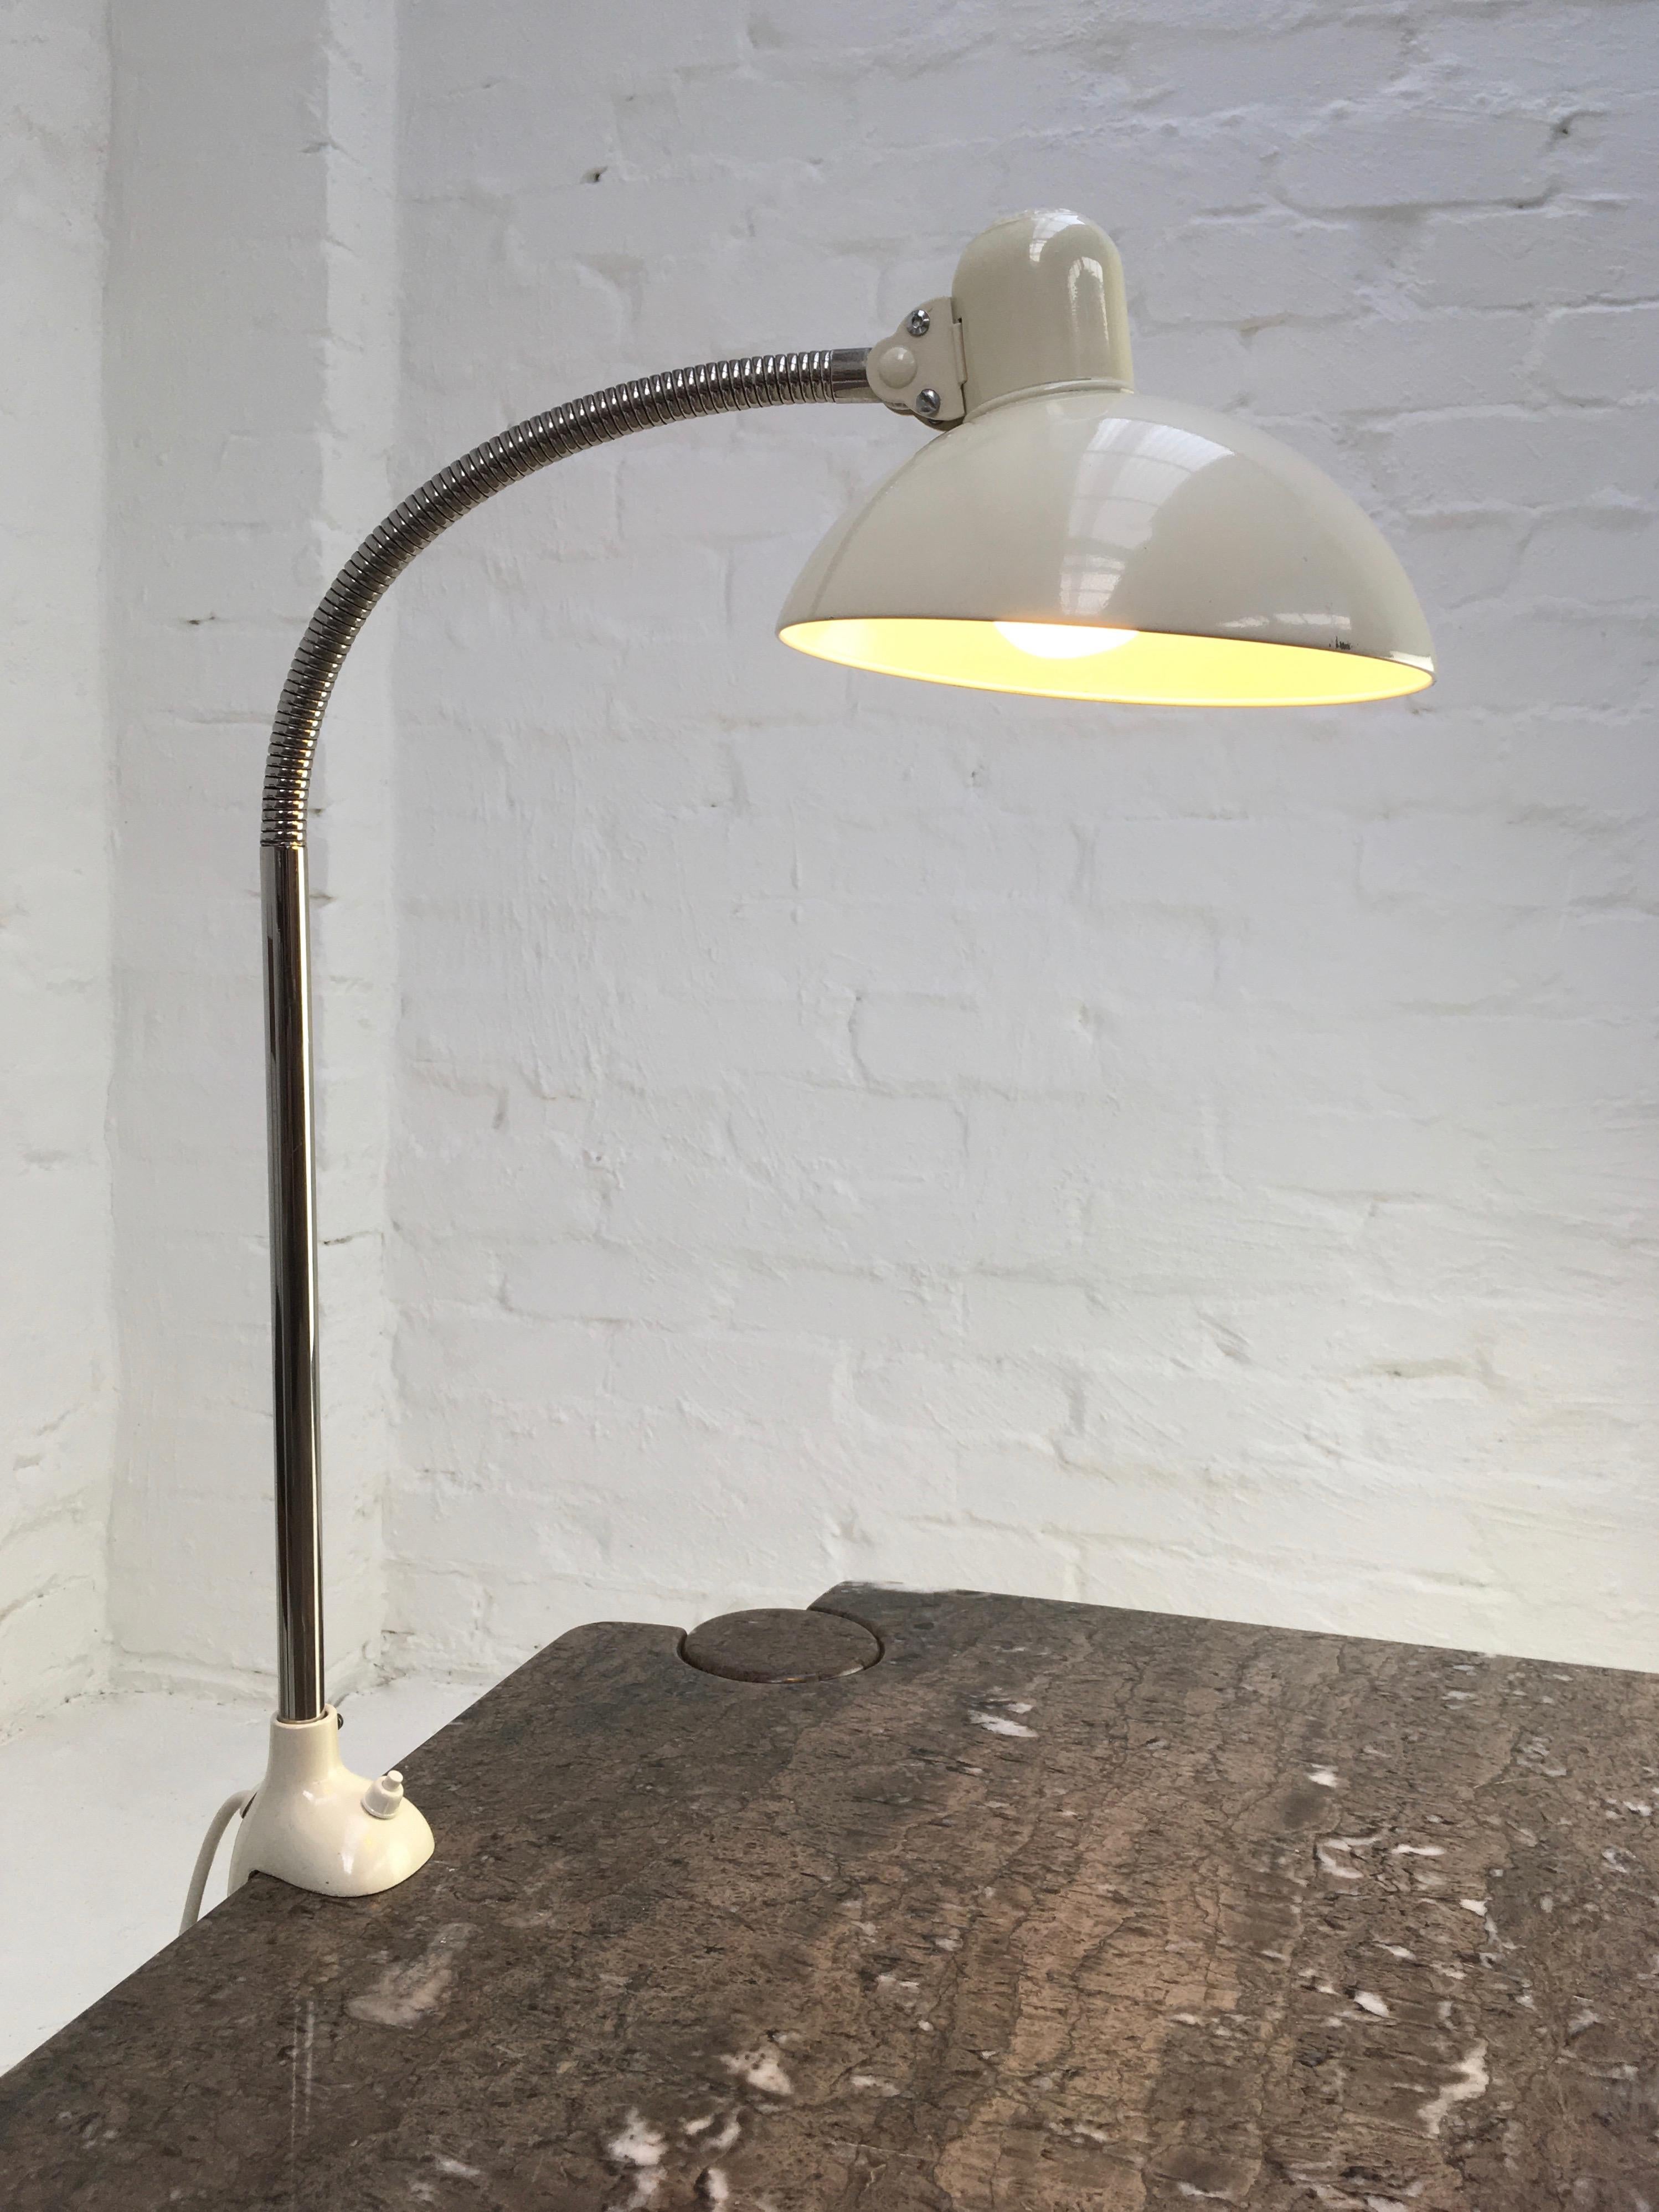 Steel Christian Dell Kaiser Idell 6740 Task Lamp with Clamp, Germany, 1930s